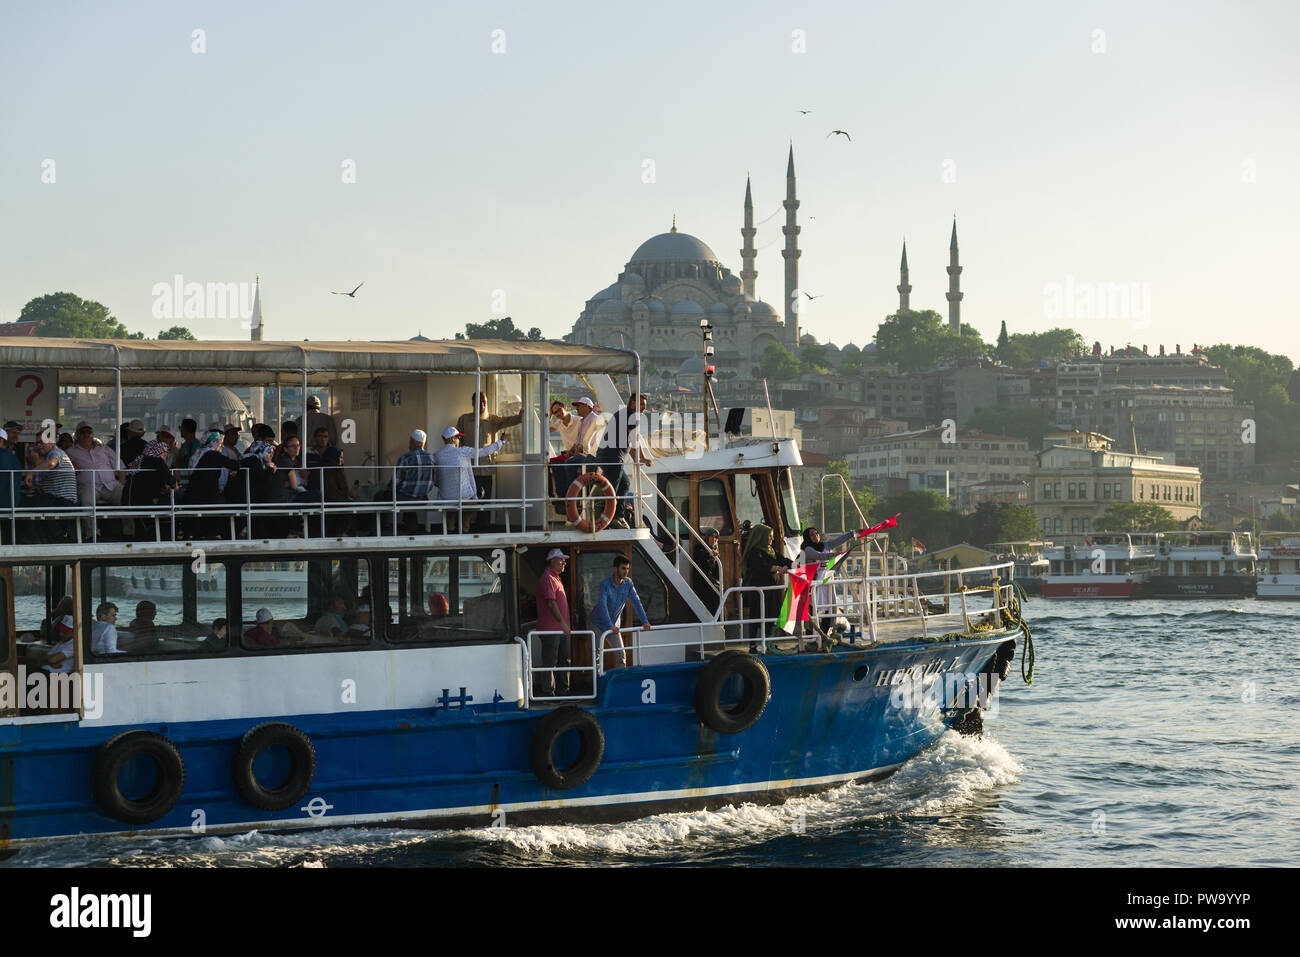 A ferry with passengers on sails on the Bosphorus with Suleymaniye mosque in the background, Istanbul, Turkey Stock Photo